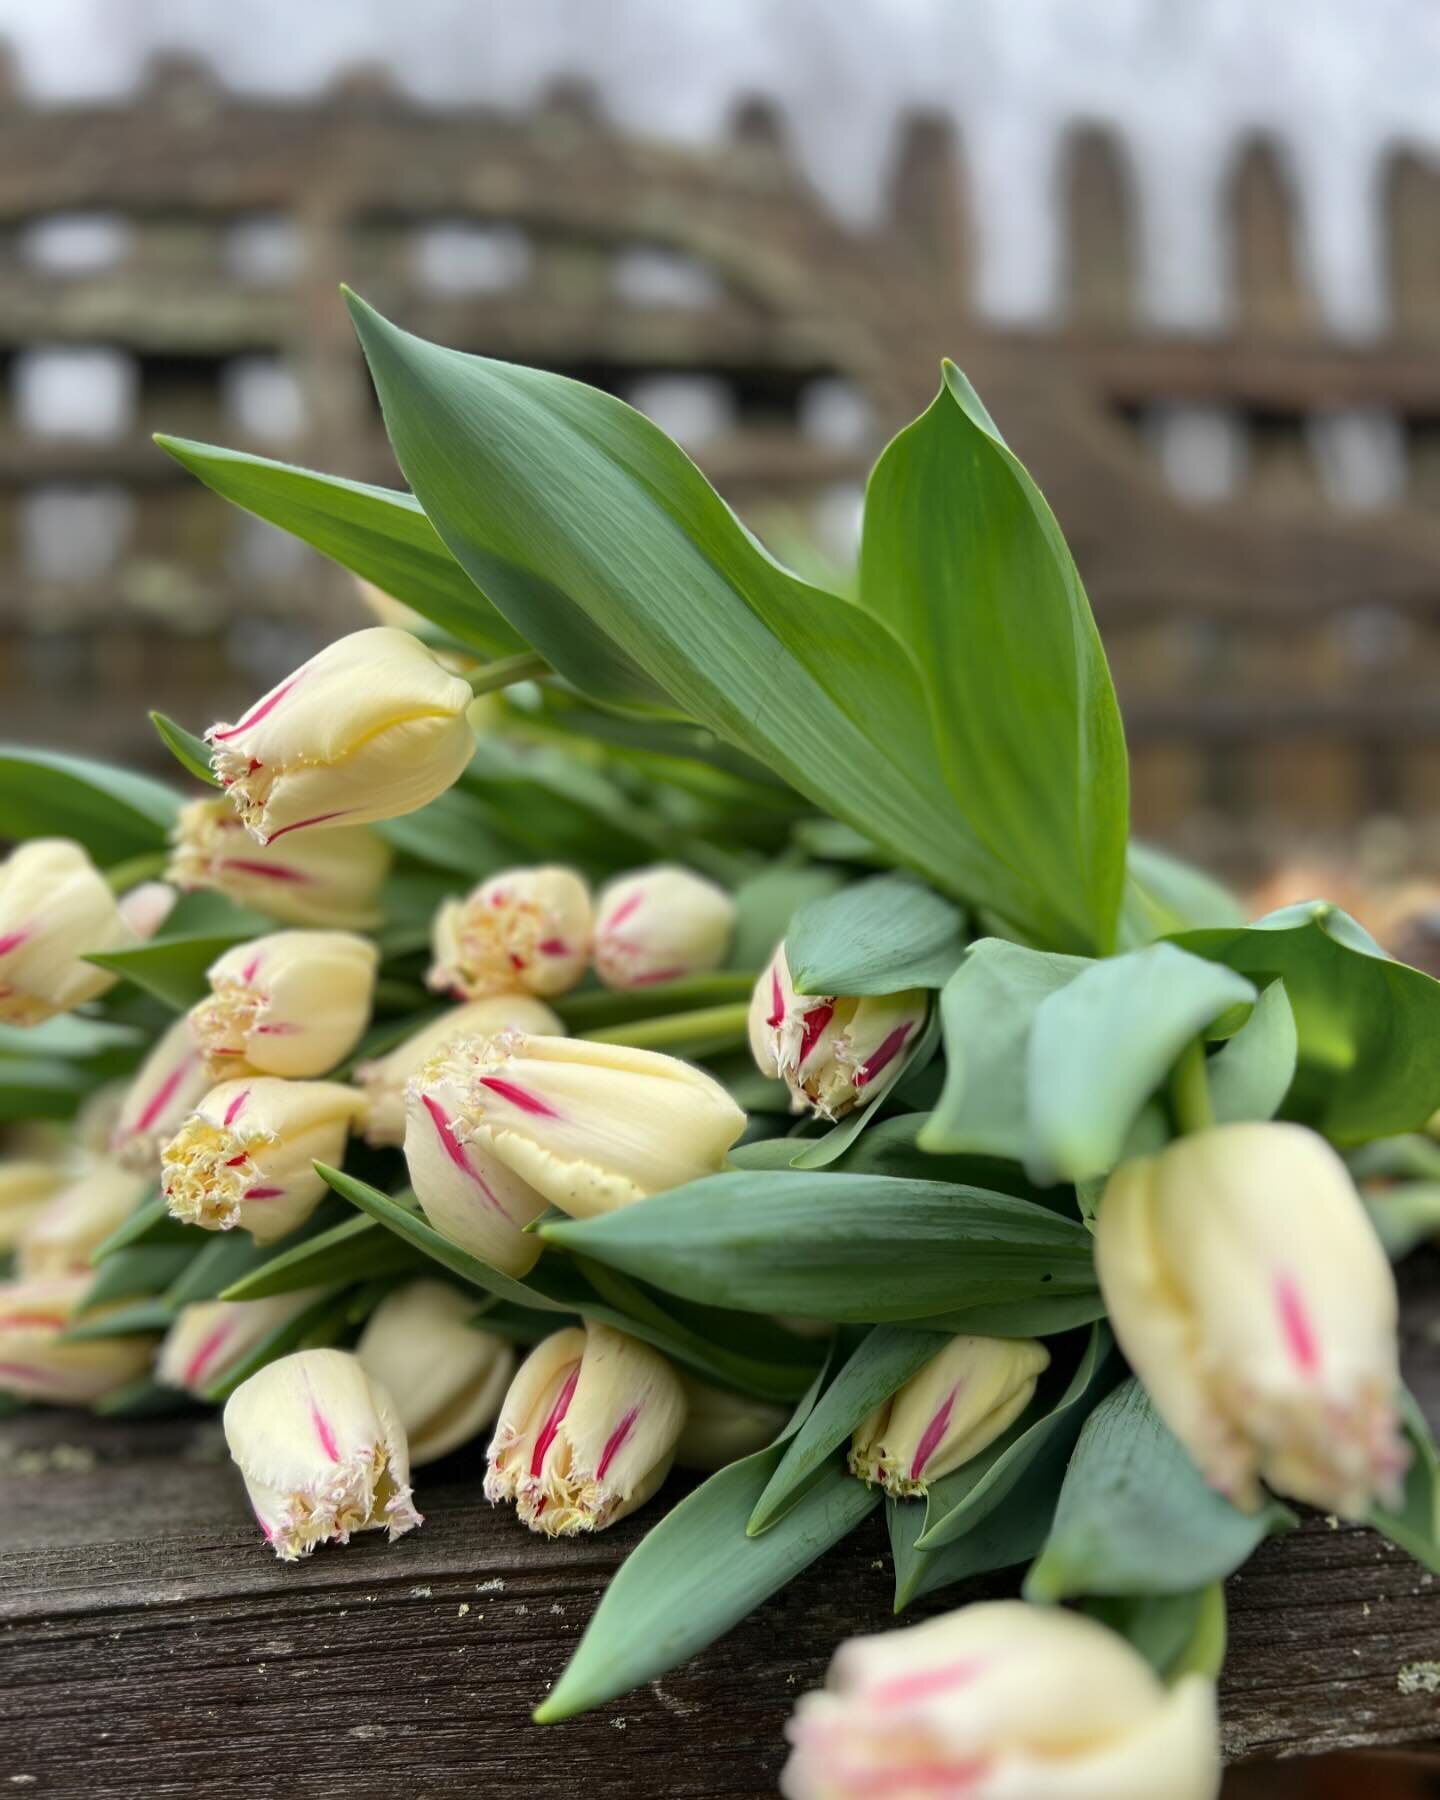 The last armful of forced tulips before they start coming in droves from the garden! Did you know that flower farmers treat tulips as an annual and pull the whole bulb? Upside of this is that you can trim the bulb off to get another inch of stem leng